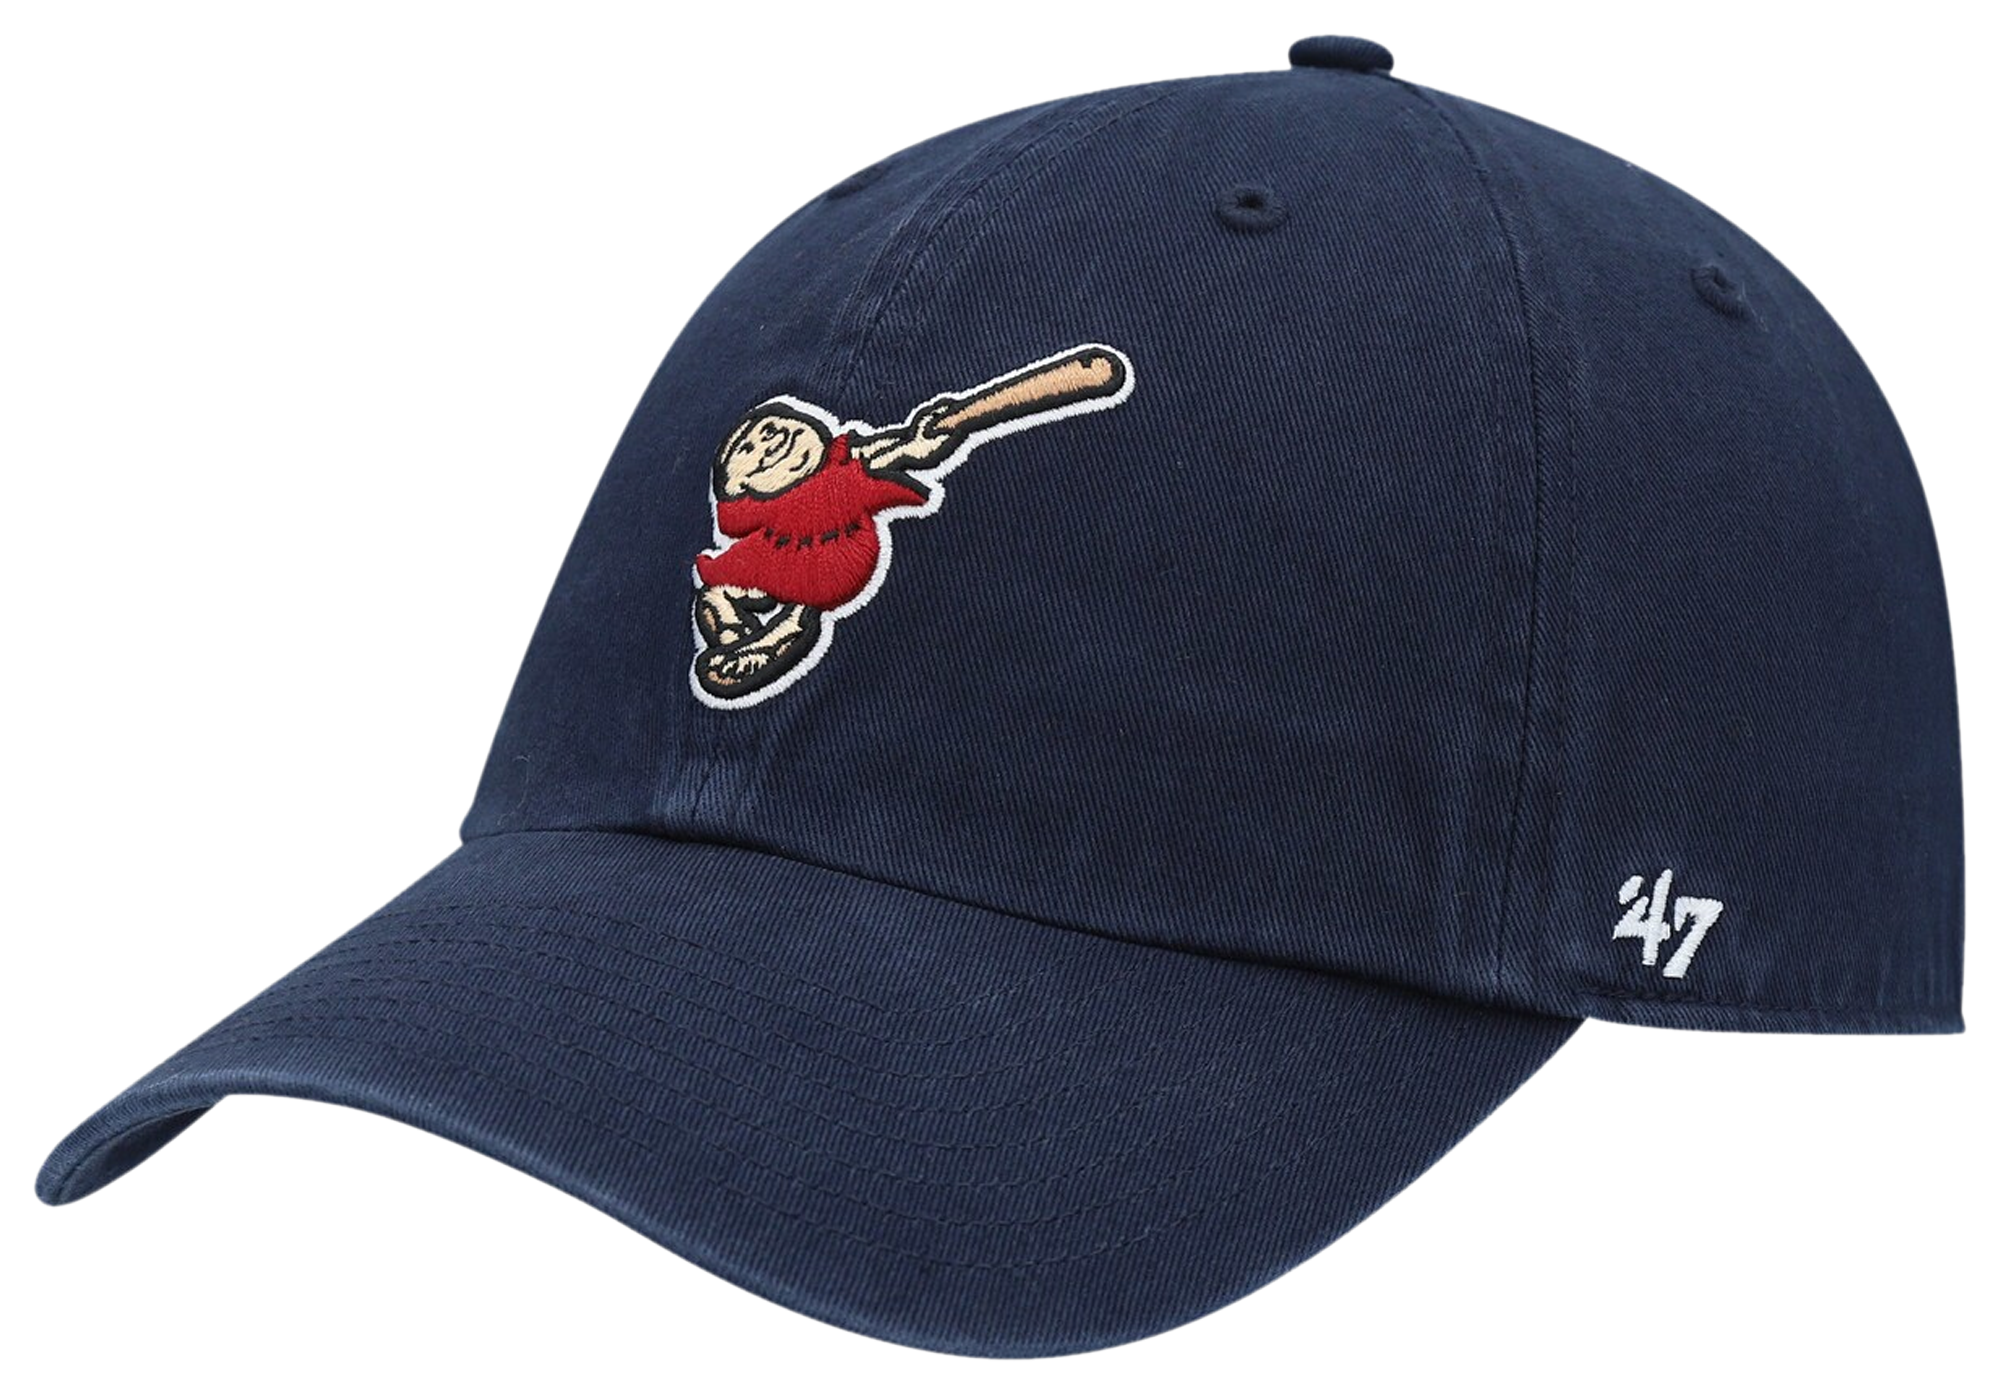 47 Brand Padres Cooperstown Collection Adjustable Cap